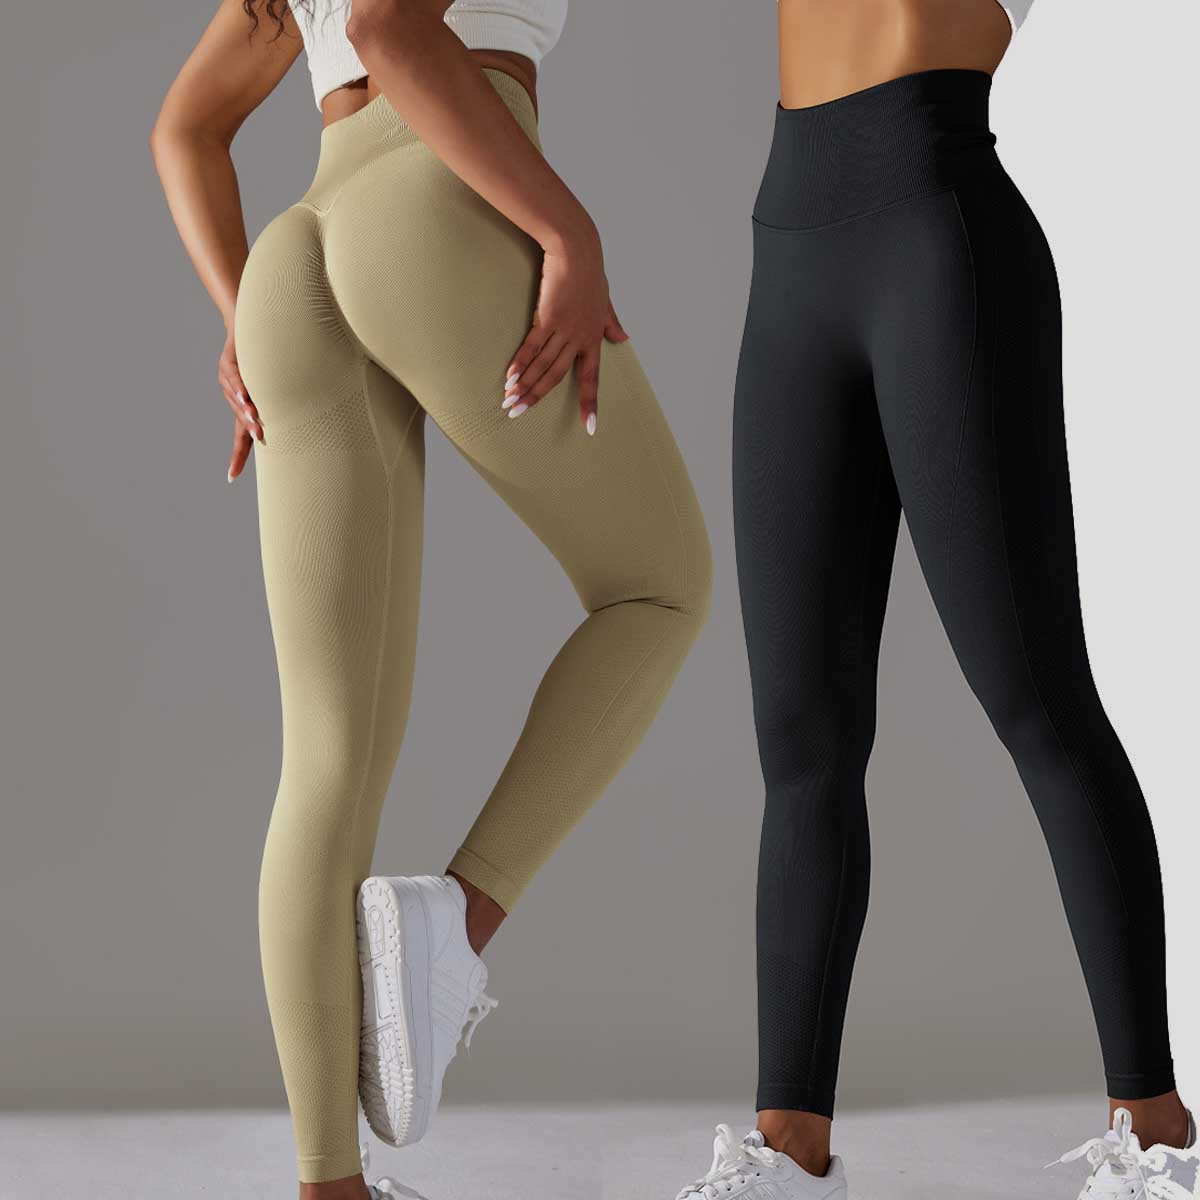 Gym Push Up Pants supplier